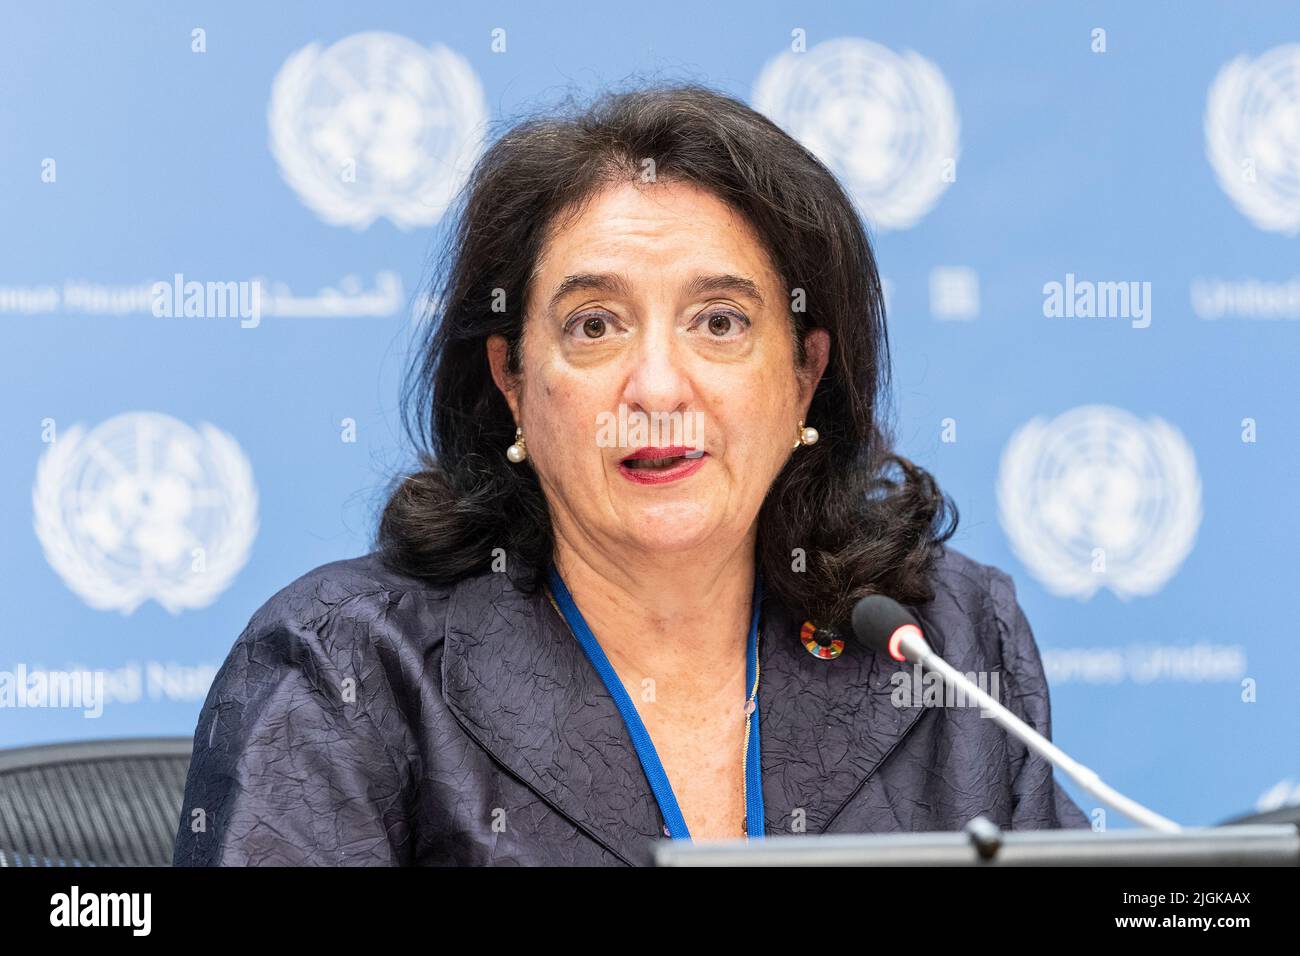 UN Assistant-Secretary-General for Policy Coordination and Inter-Agency Affairs Maria-Francesca Spatolisano speaks at press briefing on the launch of the World Population Prospects 2022 at UN Headquarters in New York on July 11, 2022. She was joined by John Wilmoth, Director, Population Division, Department of Economic and Social Affairs and Patrick Gerland, Chief, Population Estimates and Projection Section, Population Division, Department of Economic and Social Affairs . They brief the media on the occasion of World Population Day. The UN projects that on November 15, 2022 Population of the Stock Photo